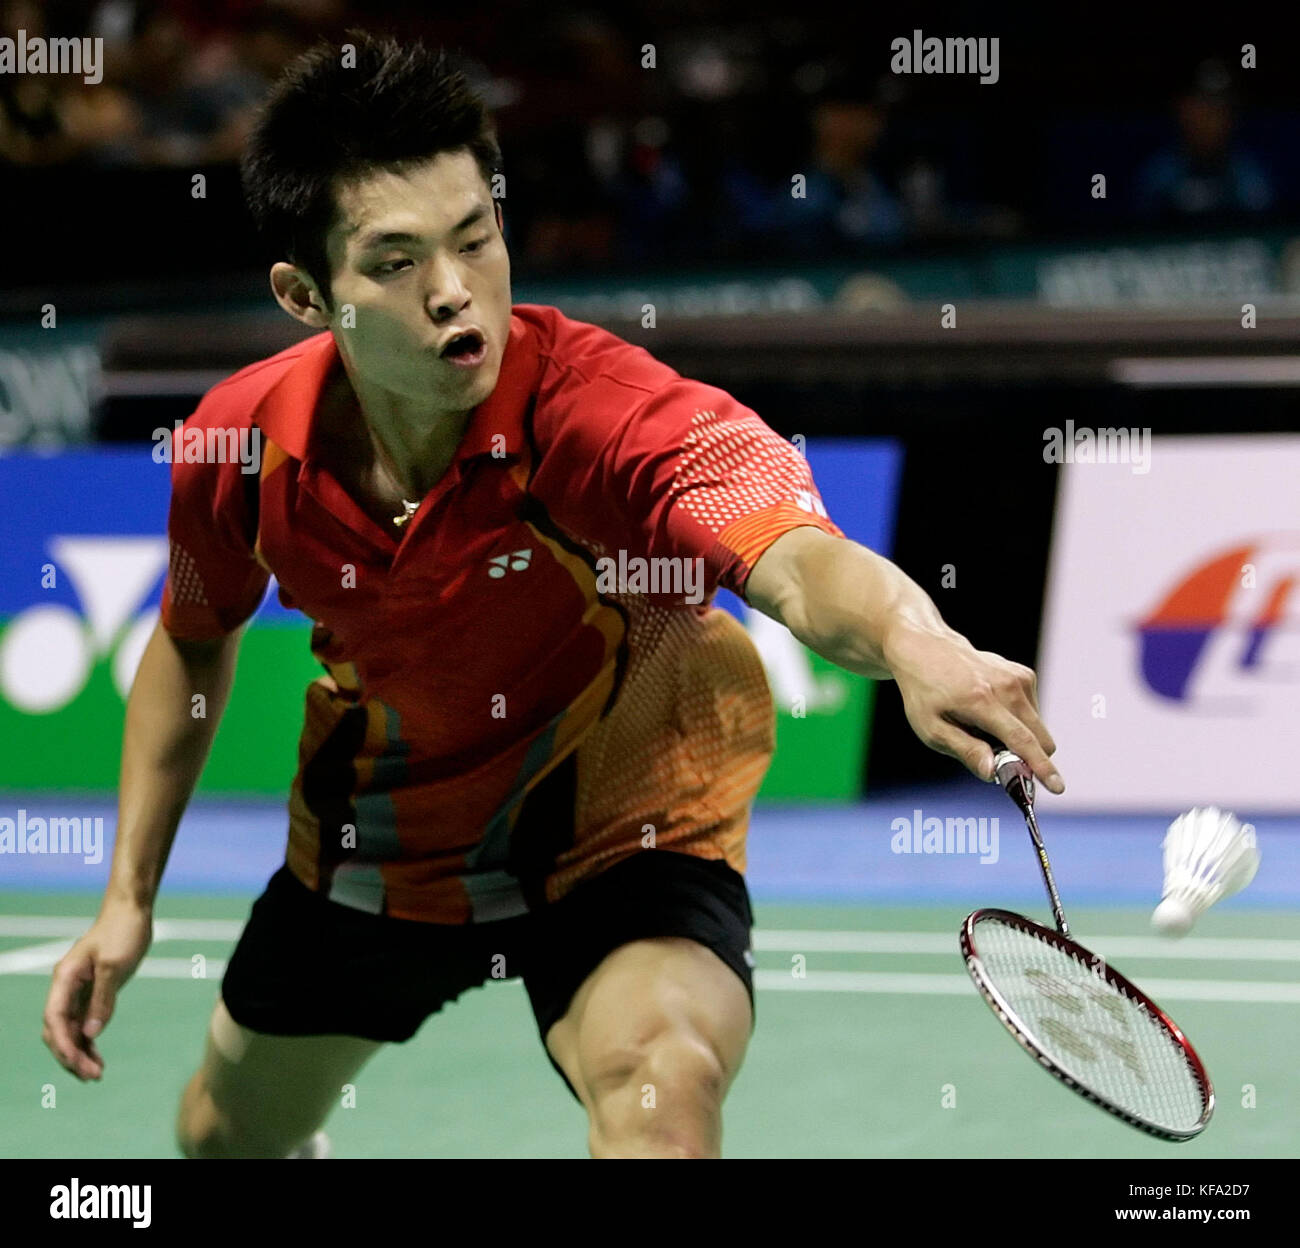 Dan Lin of China hits a backhand against Hyun Ii Lee of Korea during a quarterfinal match at the IBF Badminton World Championships in Anaheim, Calif. on Friday, Aug. 19, 2005.  Lin won, 5-15, 15-7, 15-8. Photo by Francis Specker Stock Photo